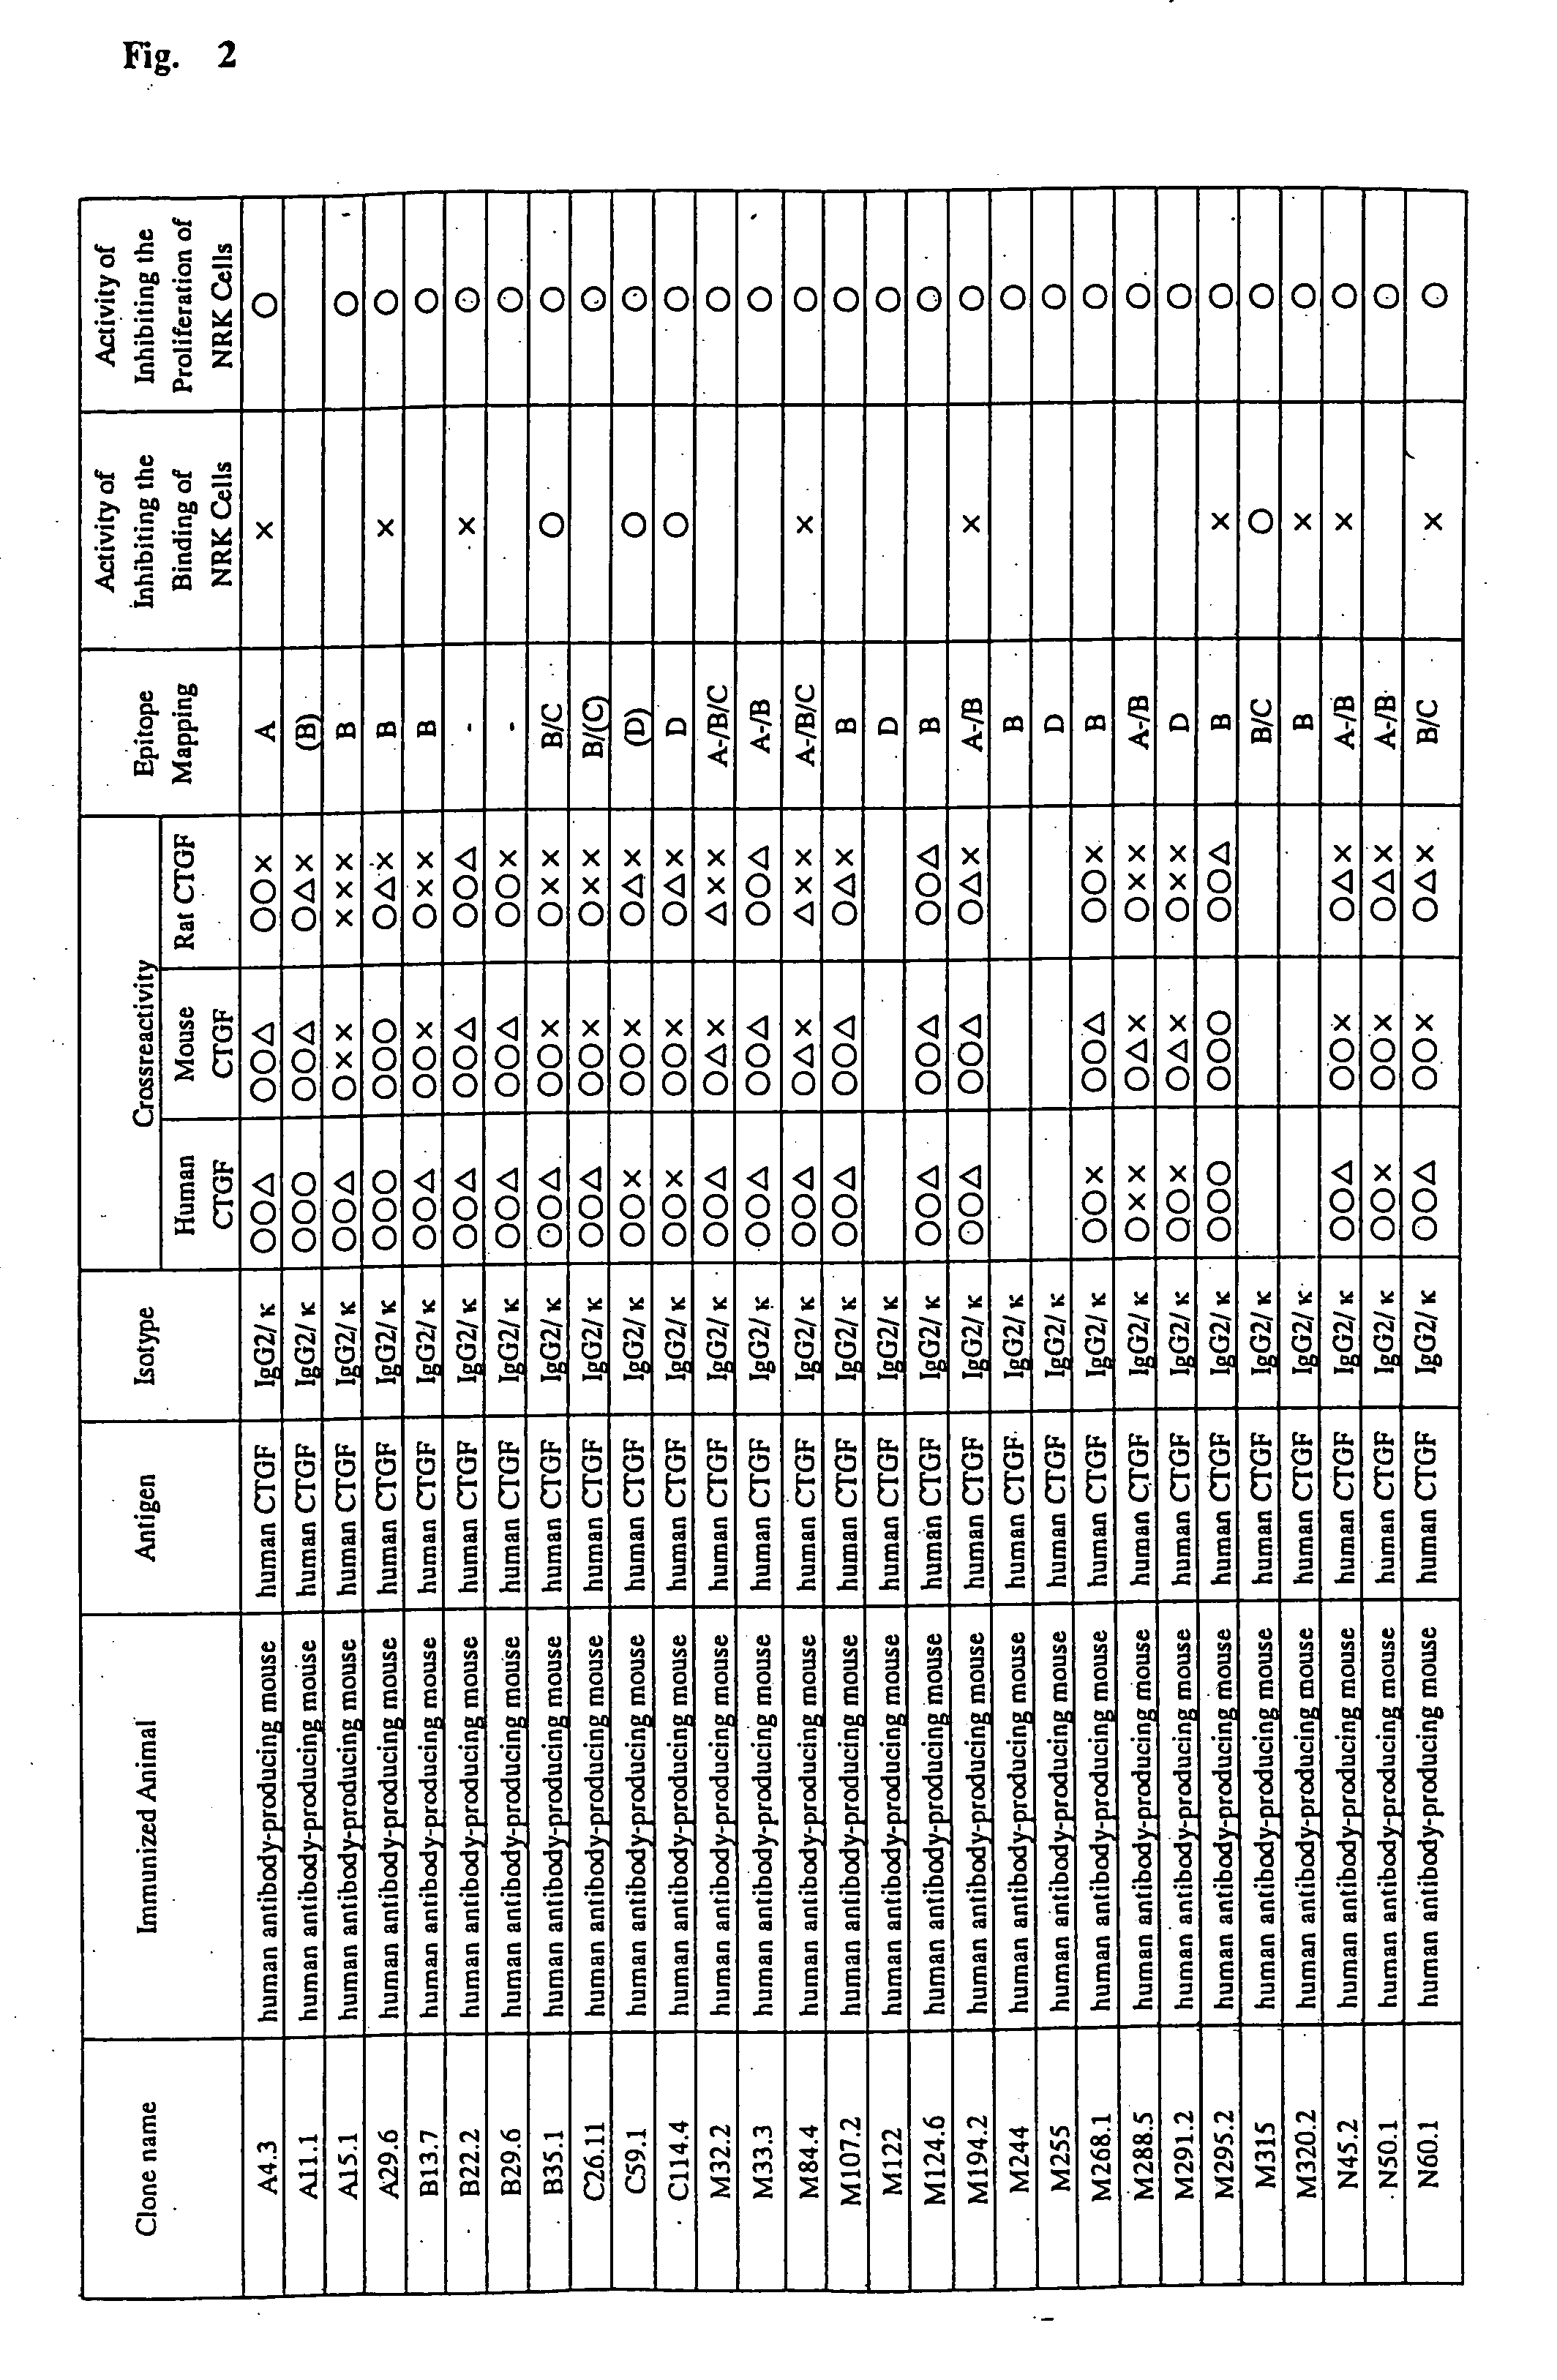 Monoclonal antibody against connective tissue growth factor and medicinal uses thereof